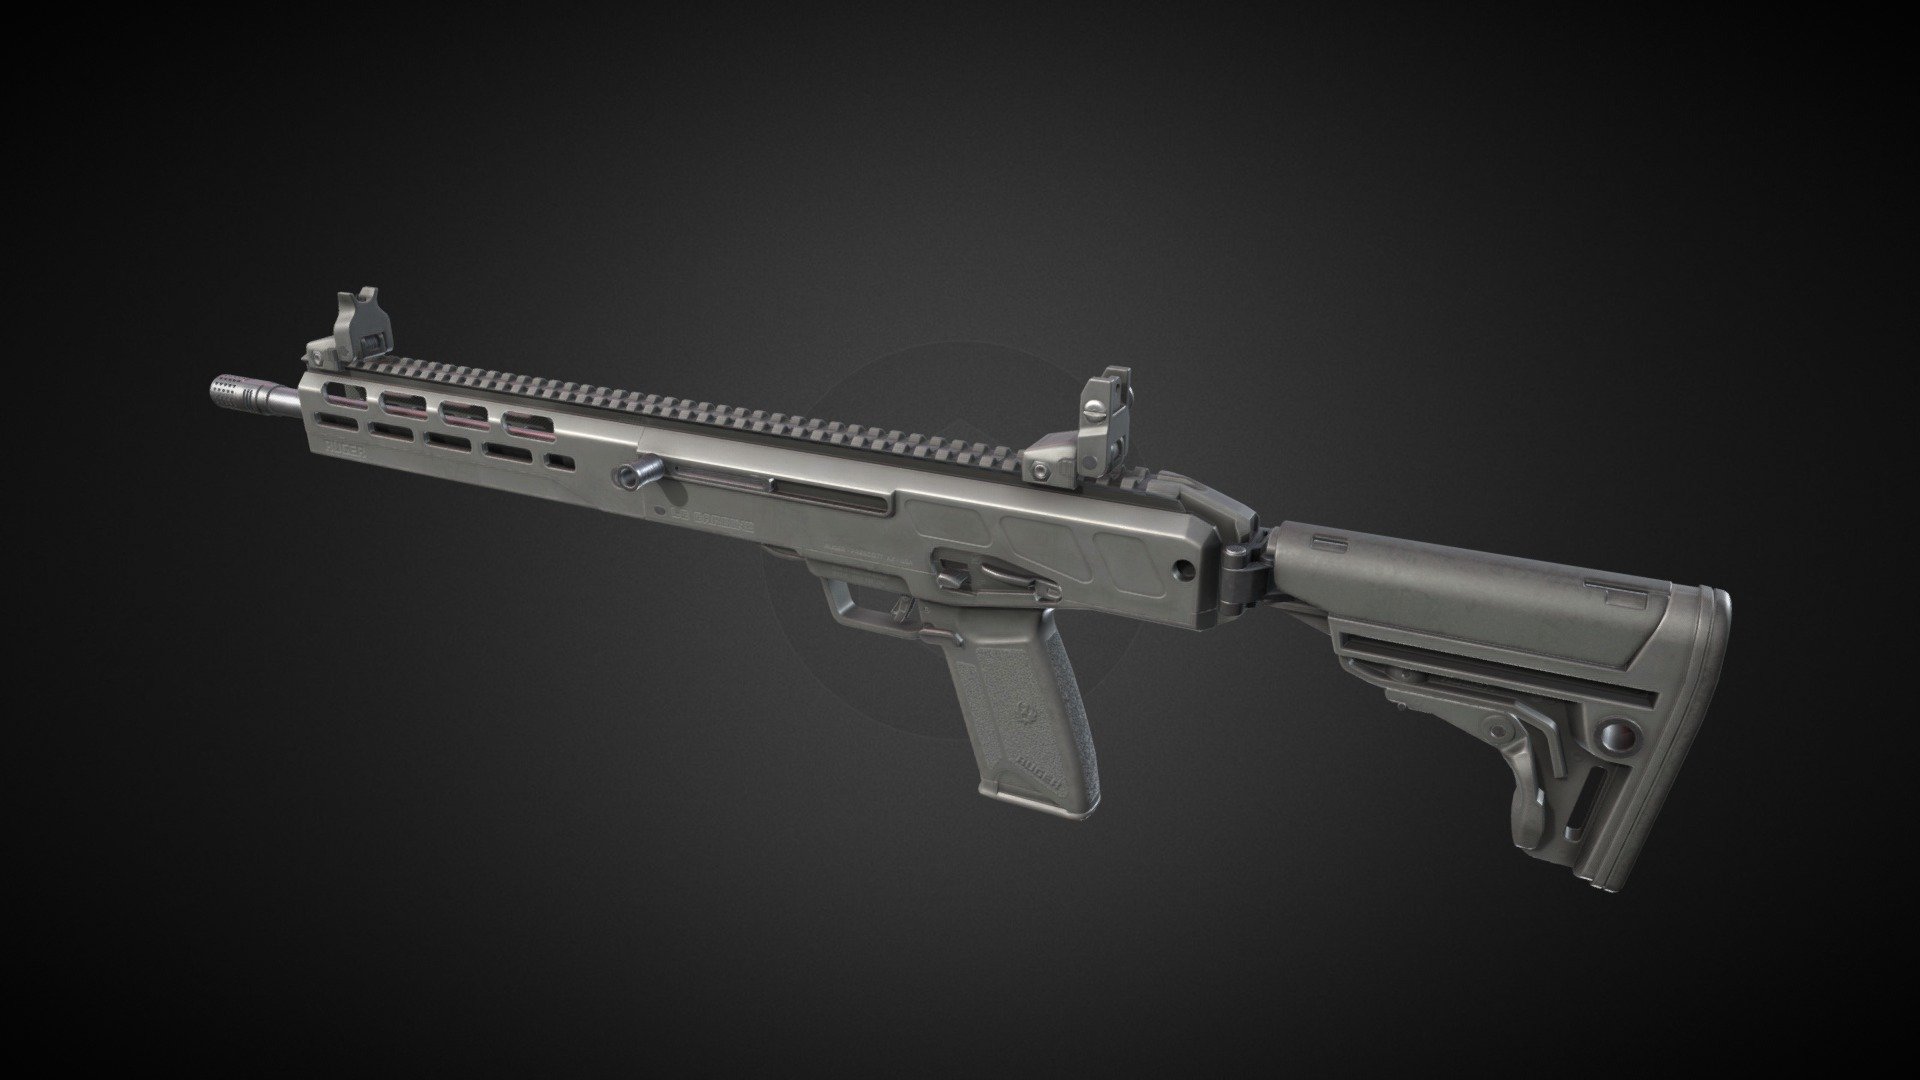 Another 5.7x28mm gun, this time lightweight carbine.

Beside standard parts I also added short handguard and bigger capacity magazine.  

Model is rigged, there is also version with all parts separated. It have 3 PBR Materials in 4K plus separate 2k for iron sights. Black and FDE colors are included.

Verts: 16K

Tris: 31K  

Made in Blender 3d model